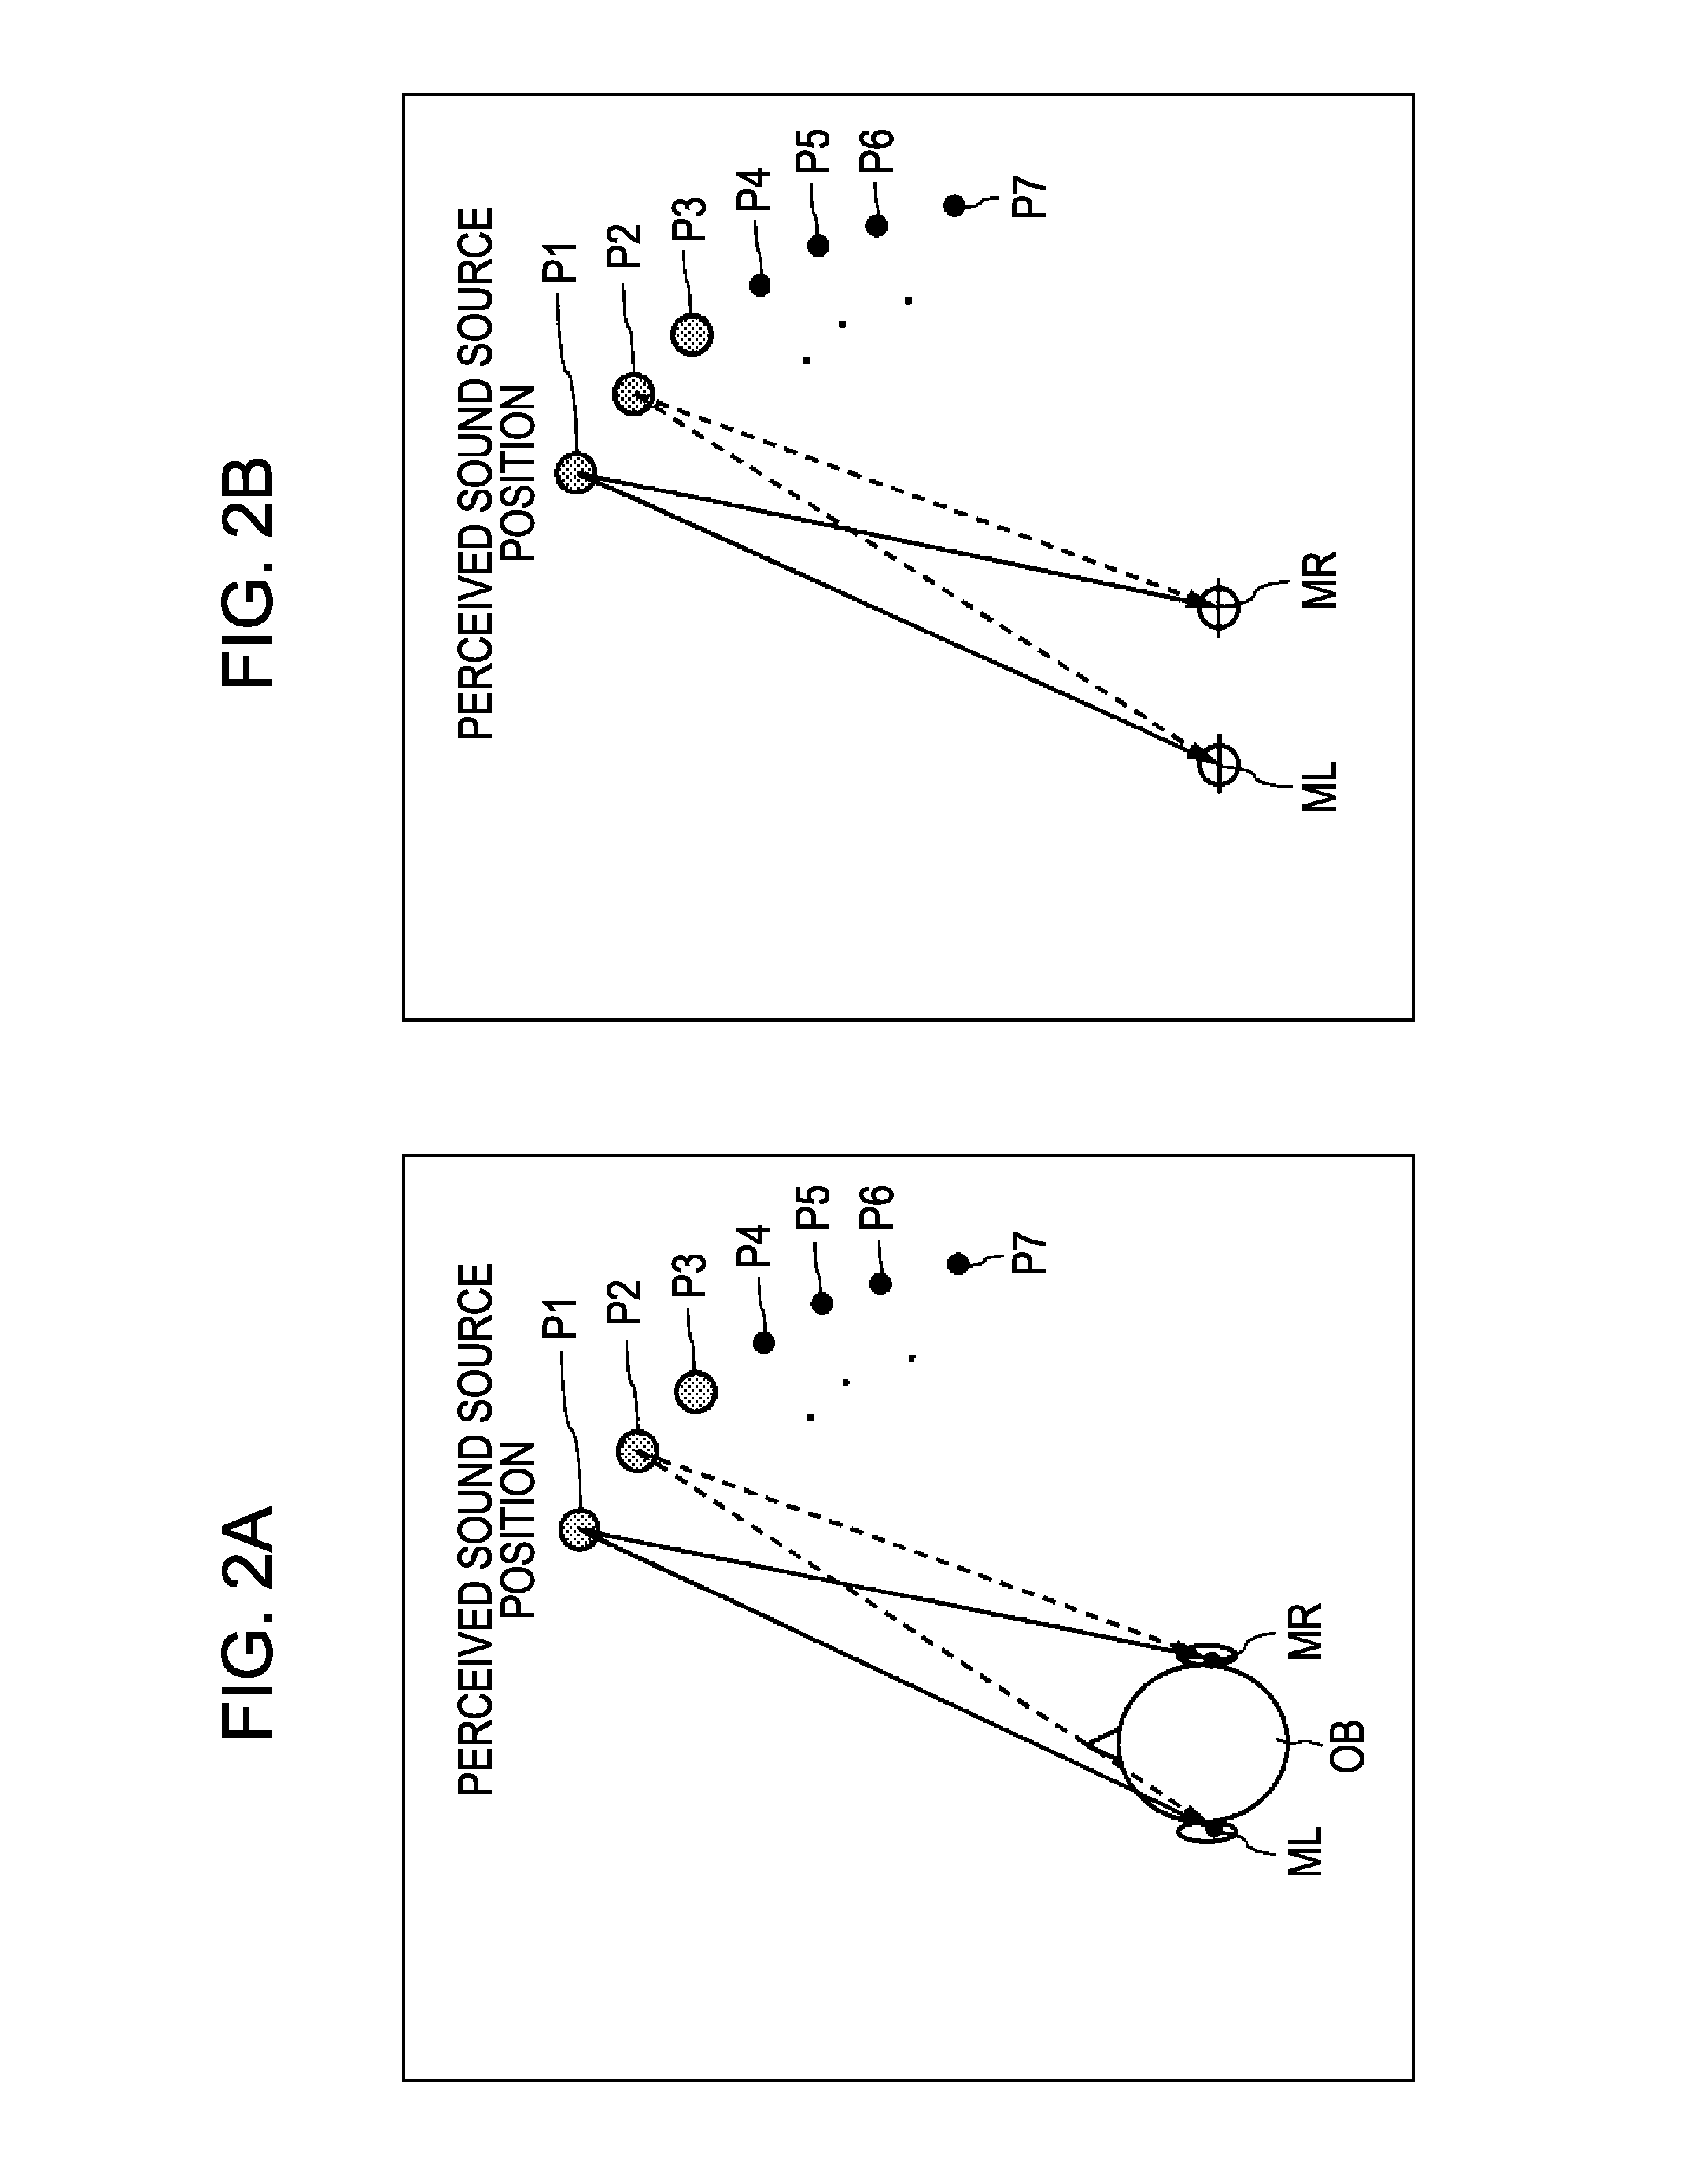 Head-related transfer function convolution method and head-related transfer function convolution device